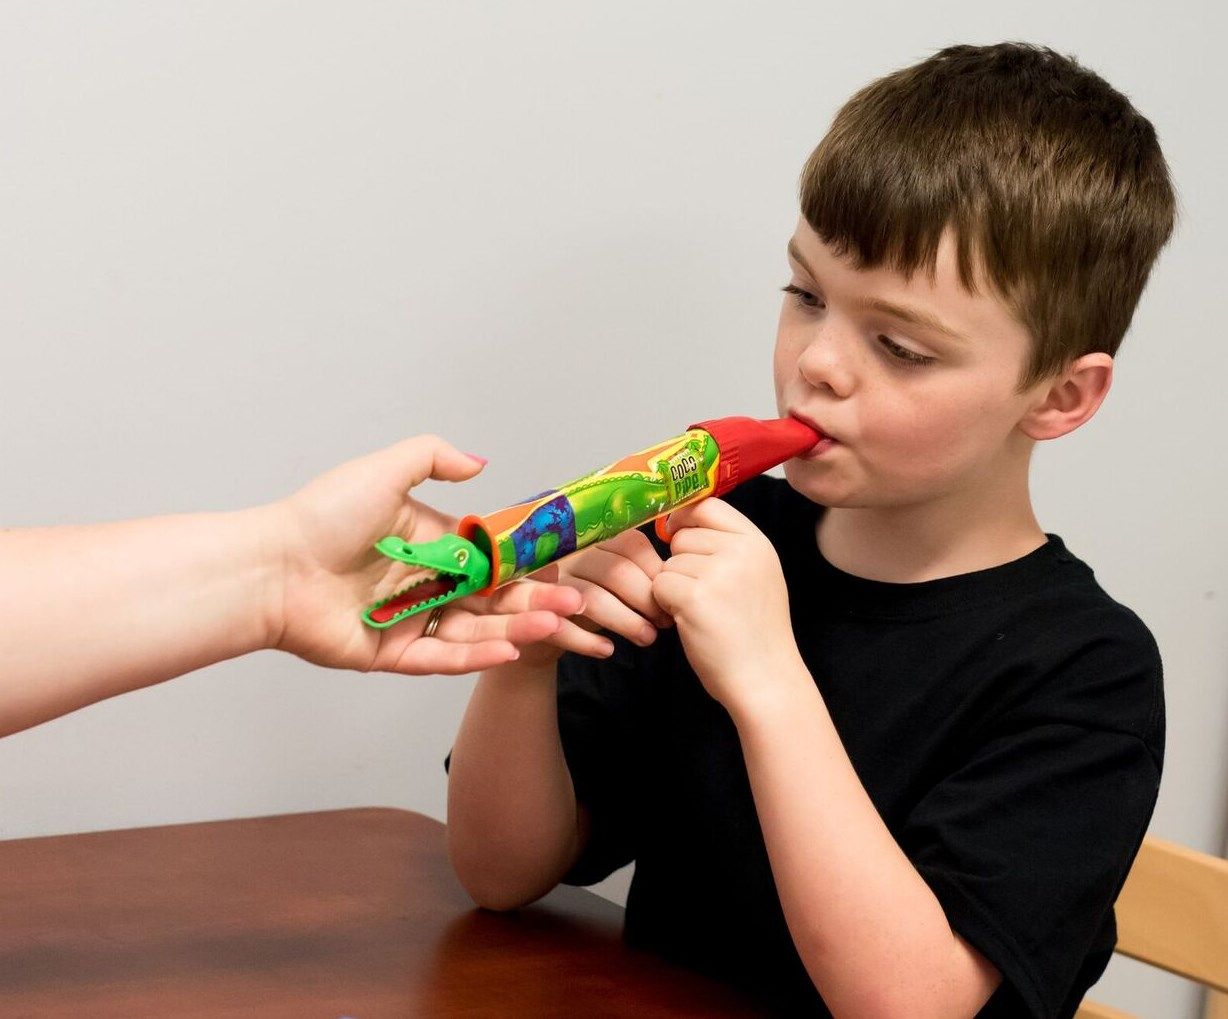 A child blowing on a toy representing PROMPT© Intervention therapy offered by South Shore Therapies in Southern MA